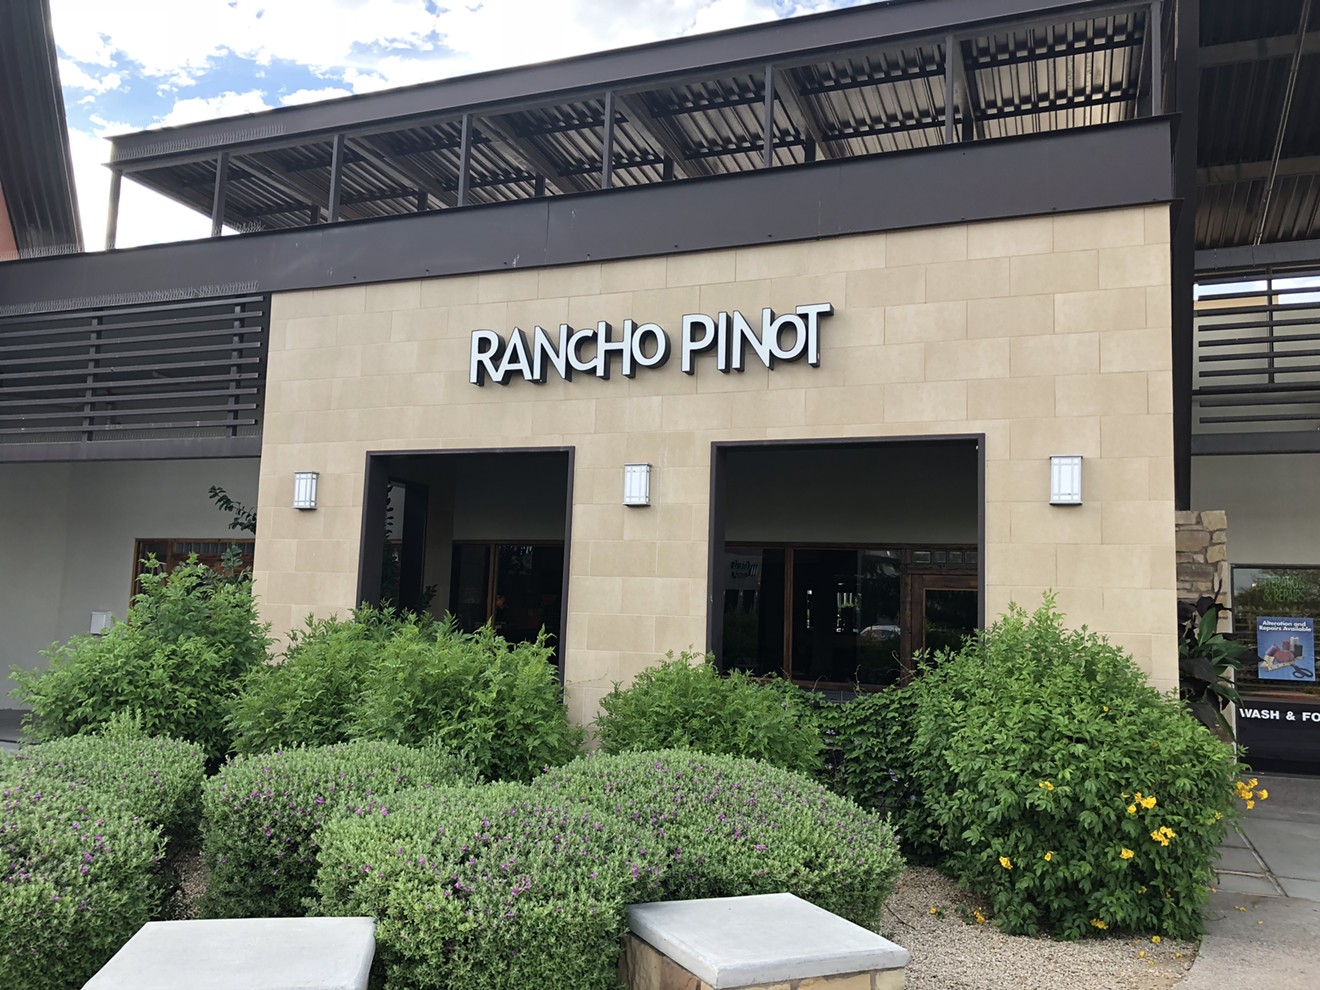 Rancho Pinot is open, but owner Chrysa Robertson says it’s been a long haul.